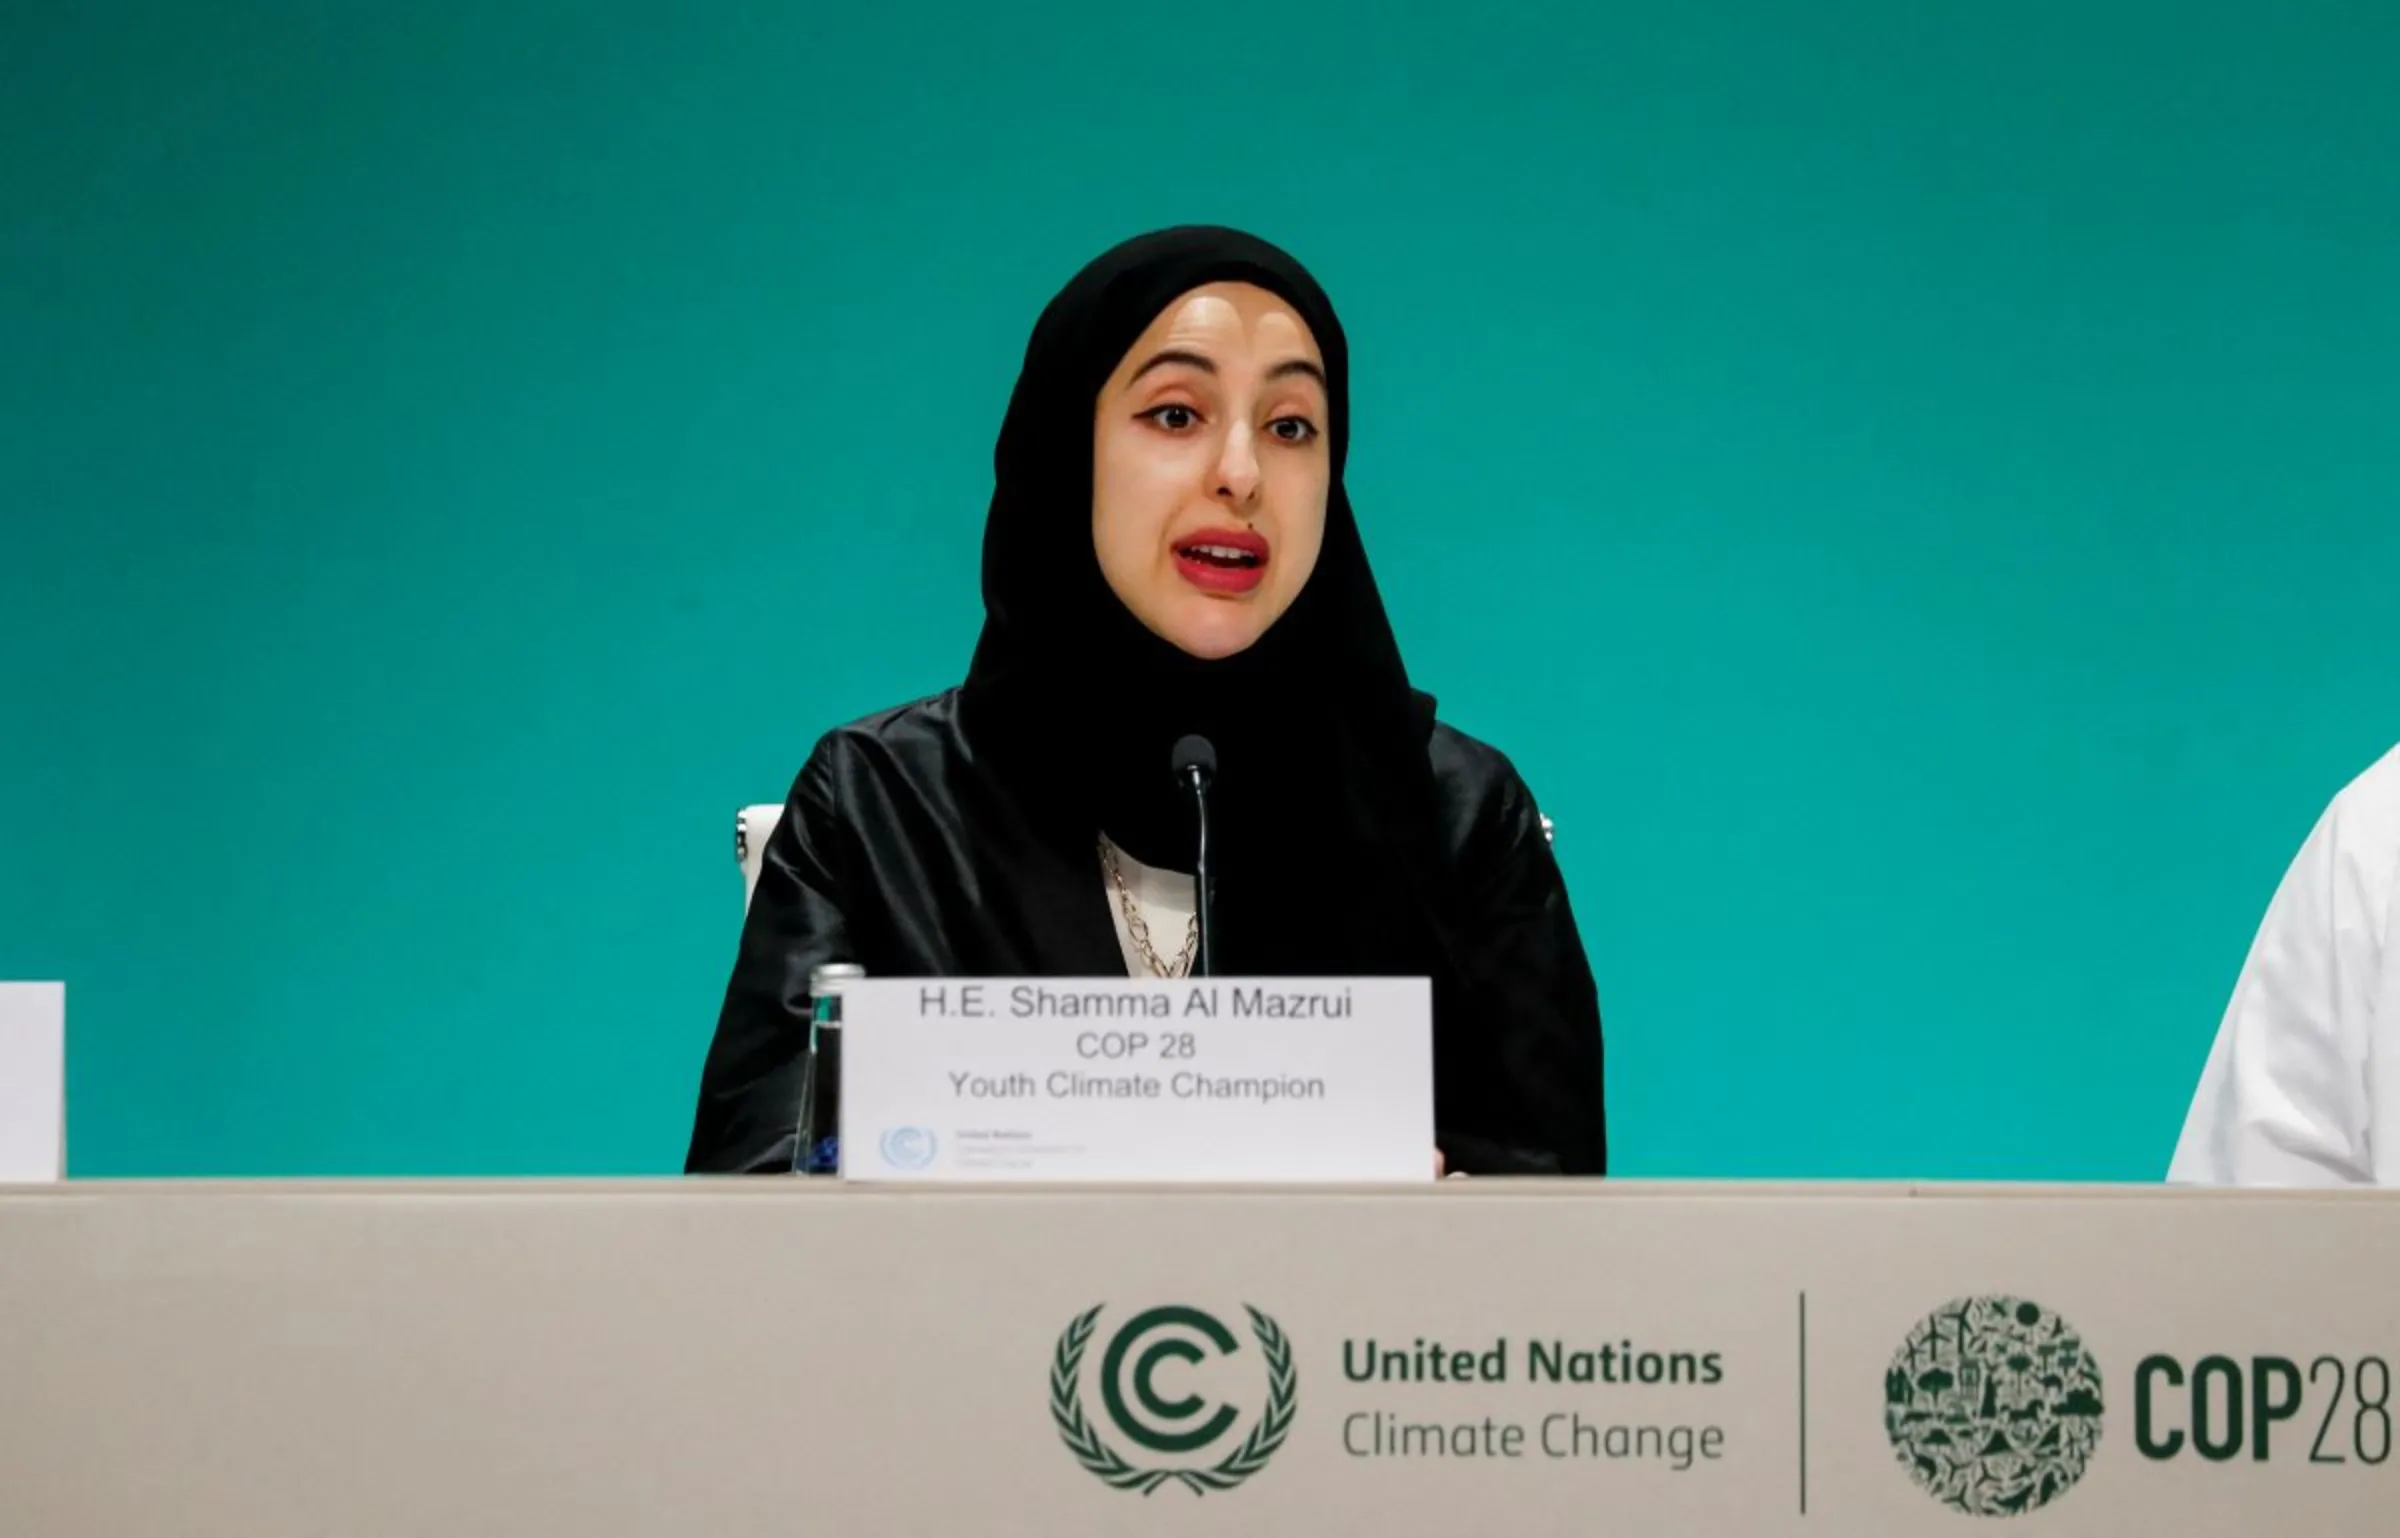 Shamma Al Mazrui, Minister of Community Development of the United Arab Emirates and COP28 Youth Climate Champion, addresses a press conference on the importance of engaging the youth in climate diplomacy, at the United Nations Climate Change Conference (COP28) in Dubai, United Arab Emirates December 8, 2023